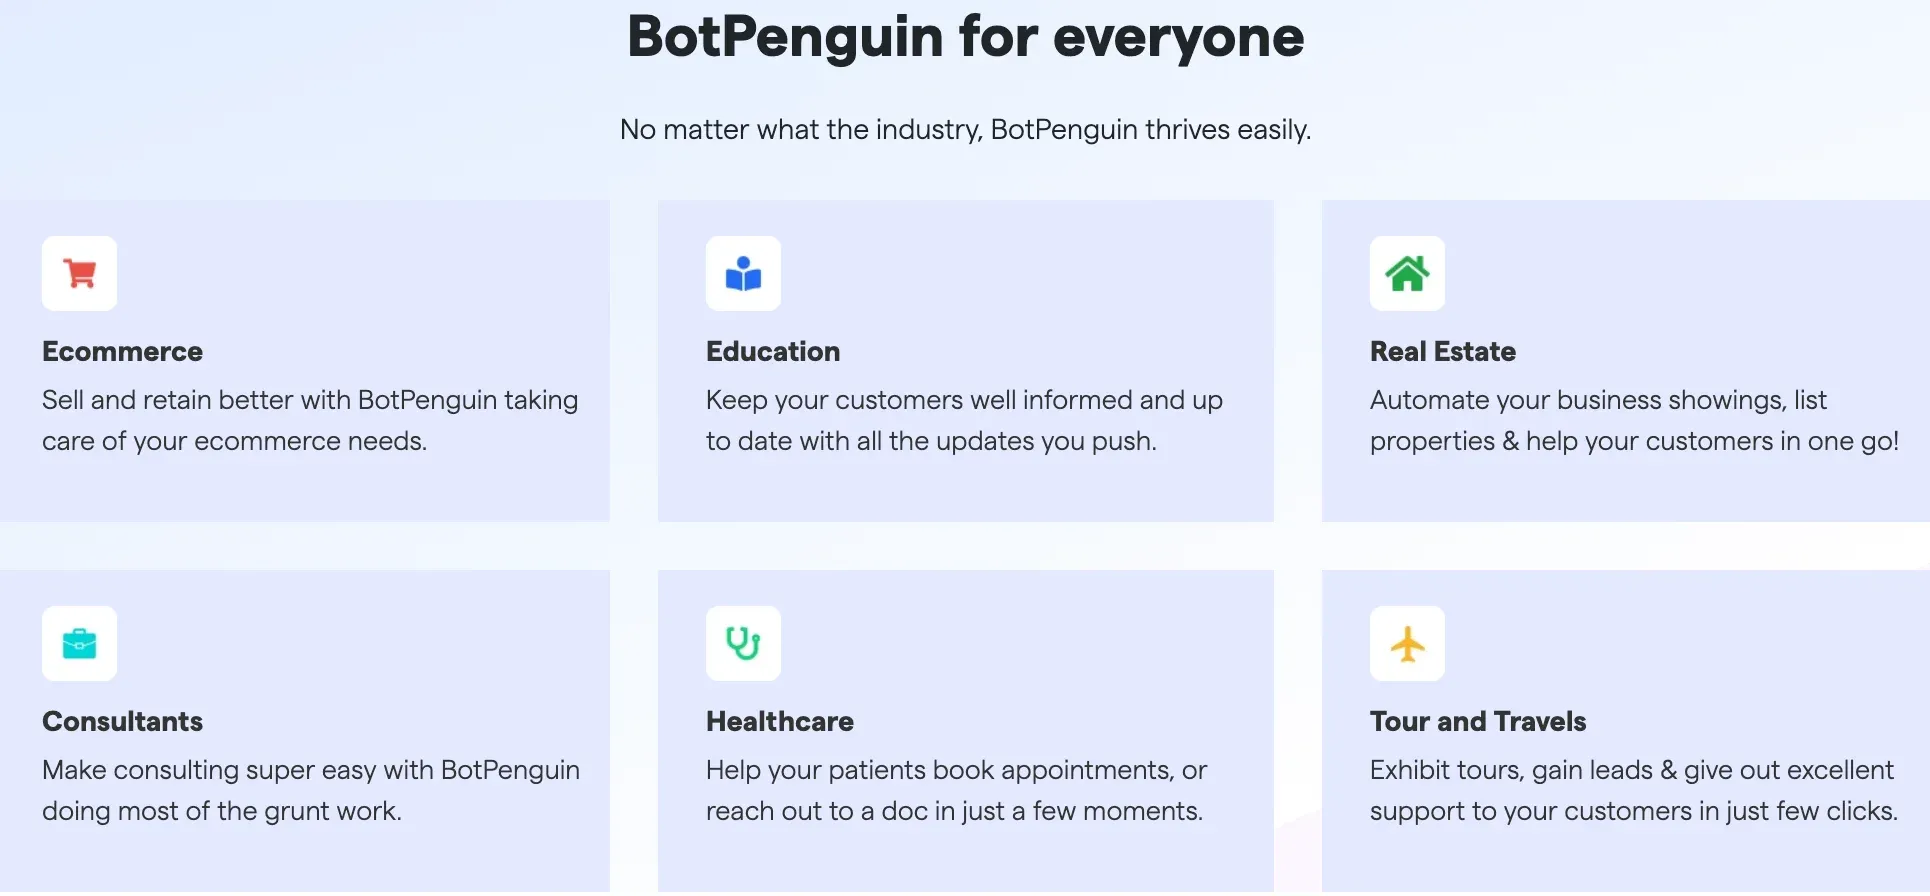 Who can use BotPenguin?